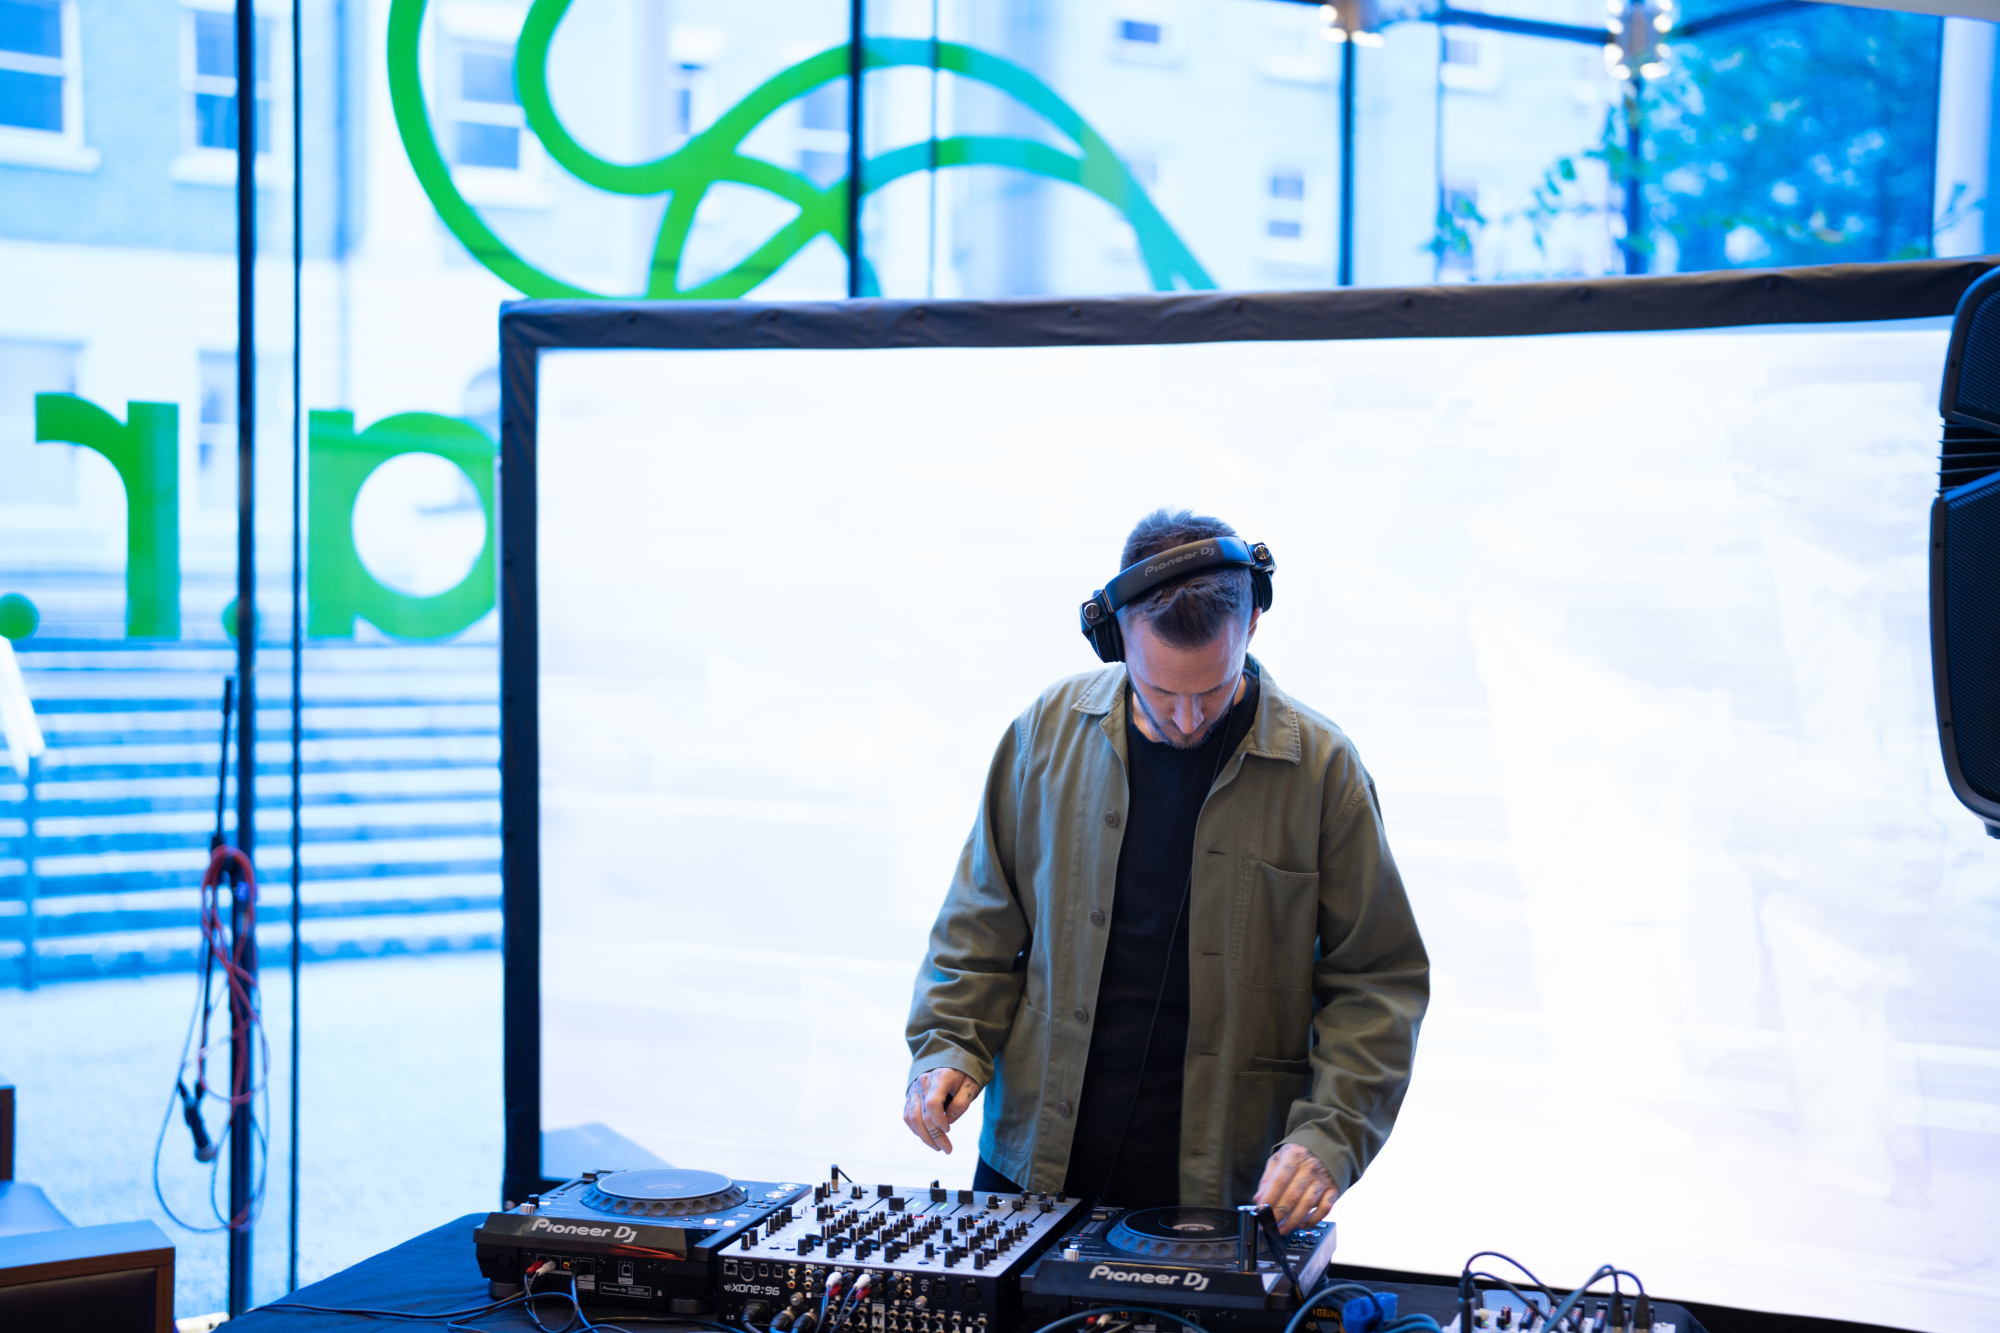 DJ using deck in front of large videos screen